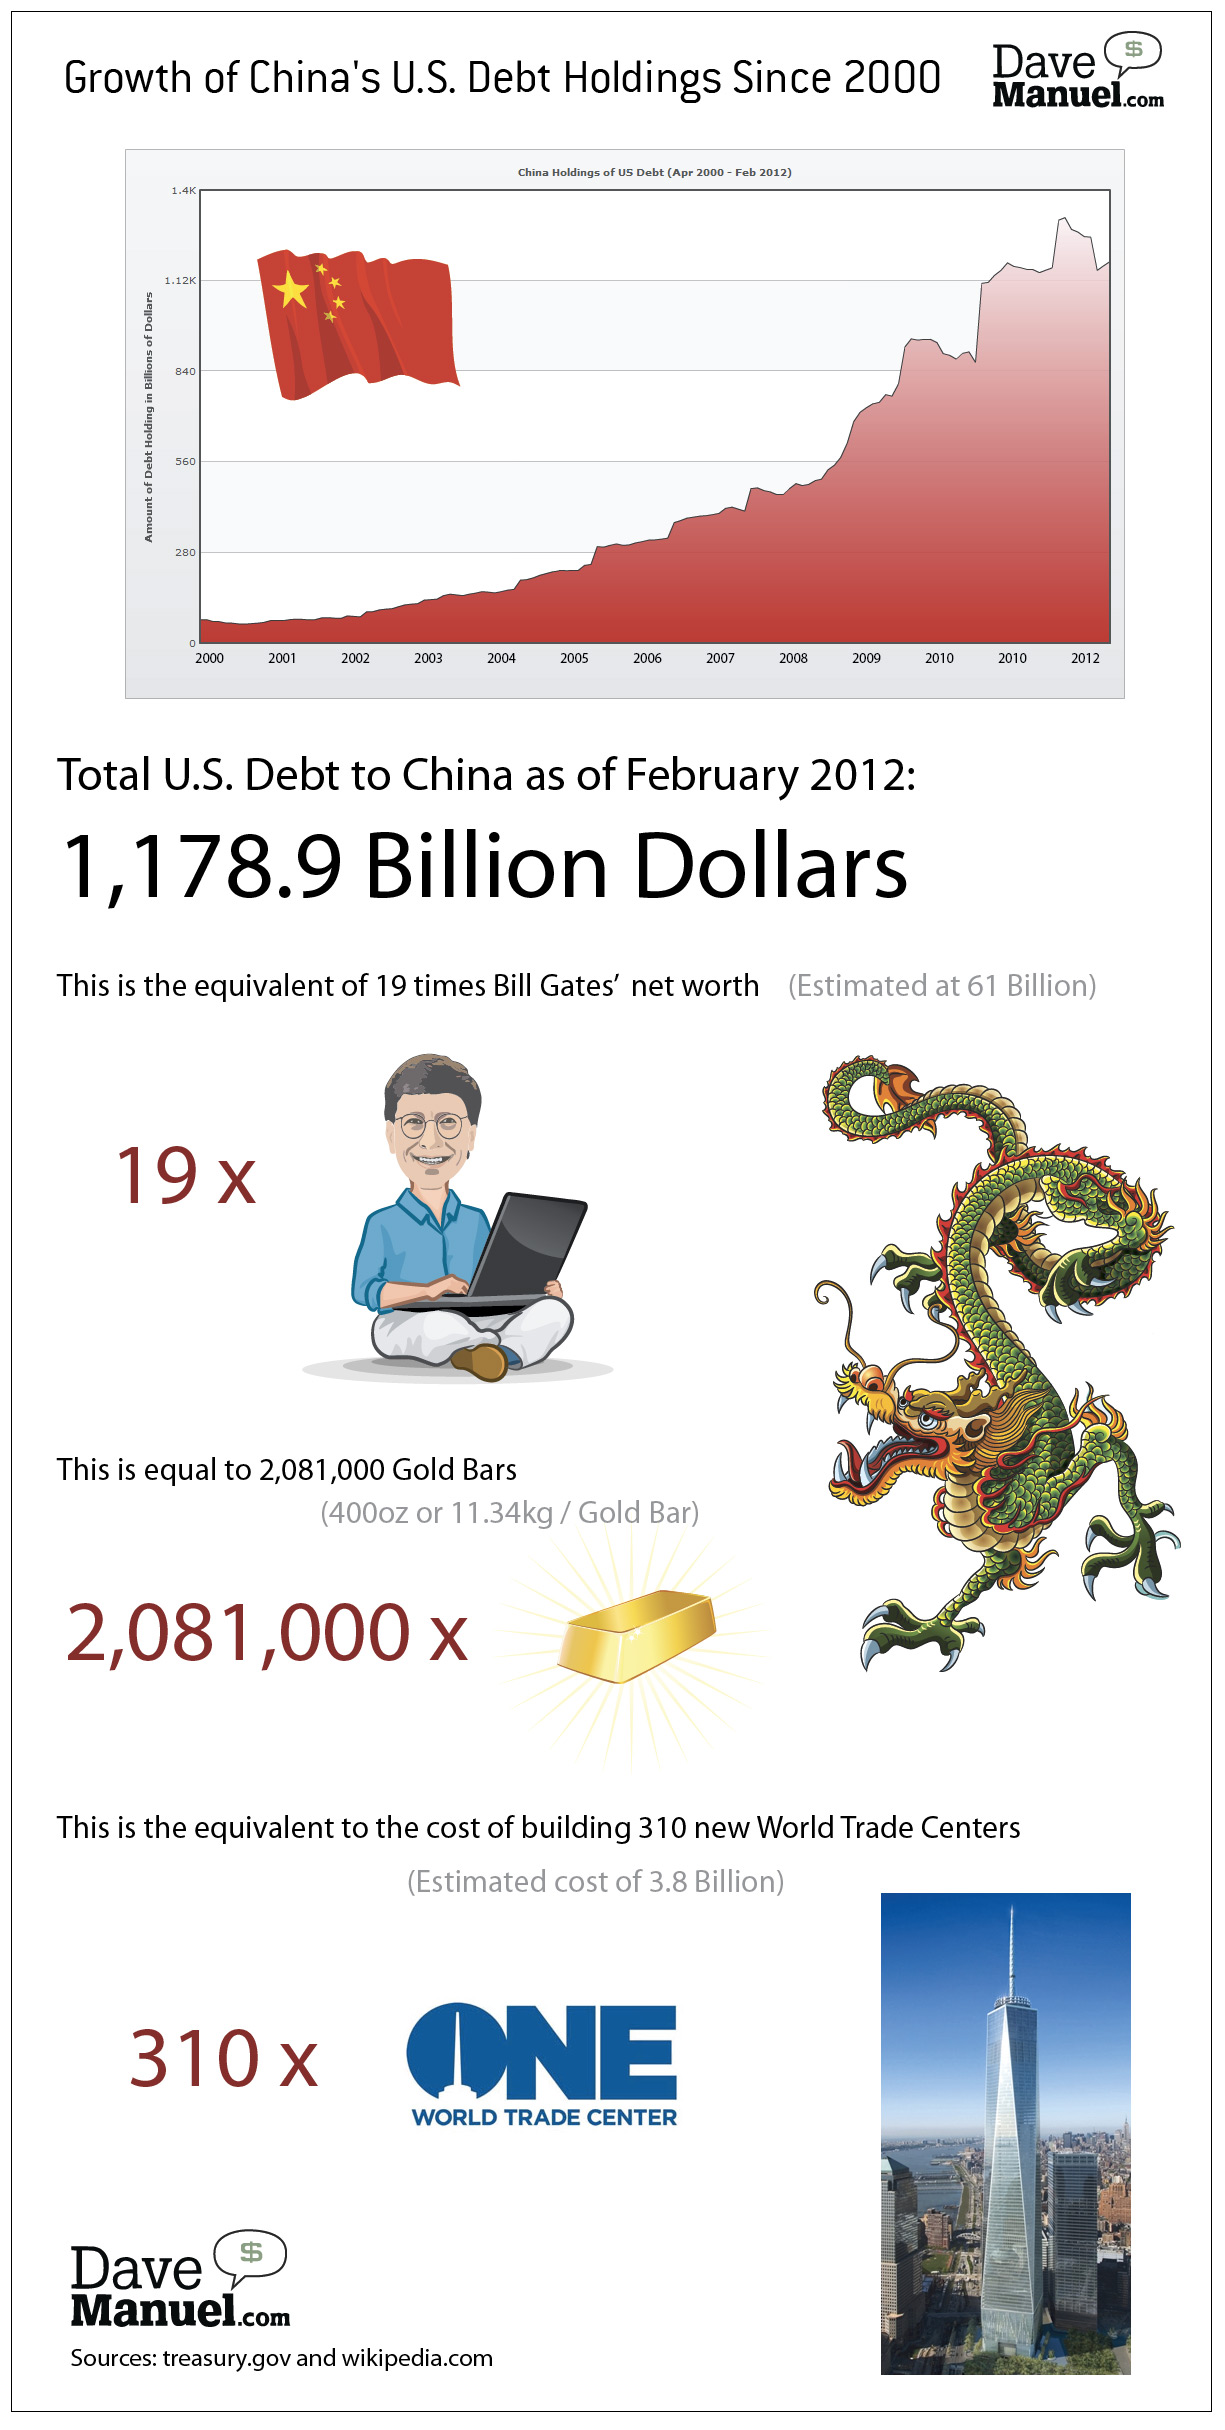 Infographic about growing U.S. debt to China - Compares the outstanding debt to net worth of Bill Gates, cost of building the One World Trade Center and gold bars - Illustration